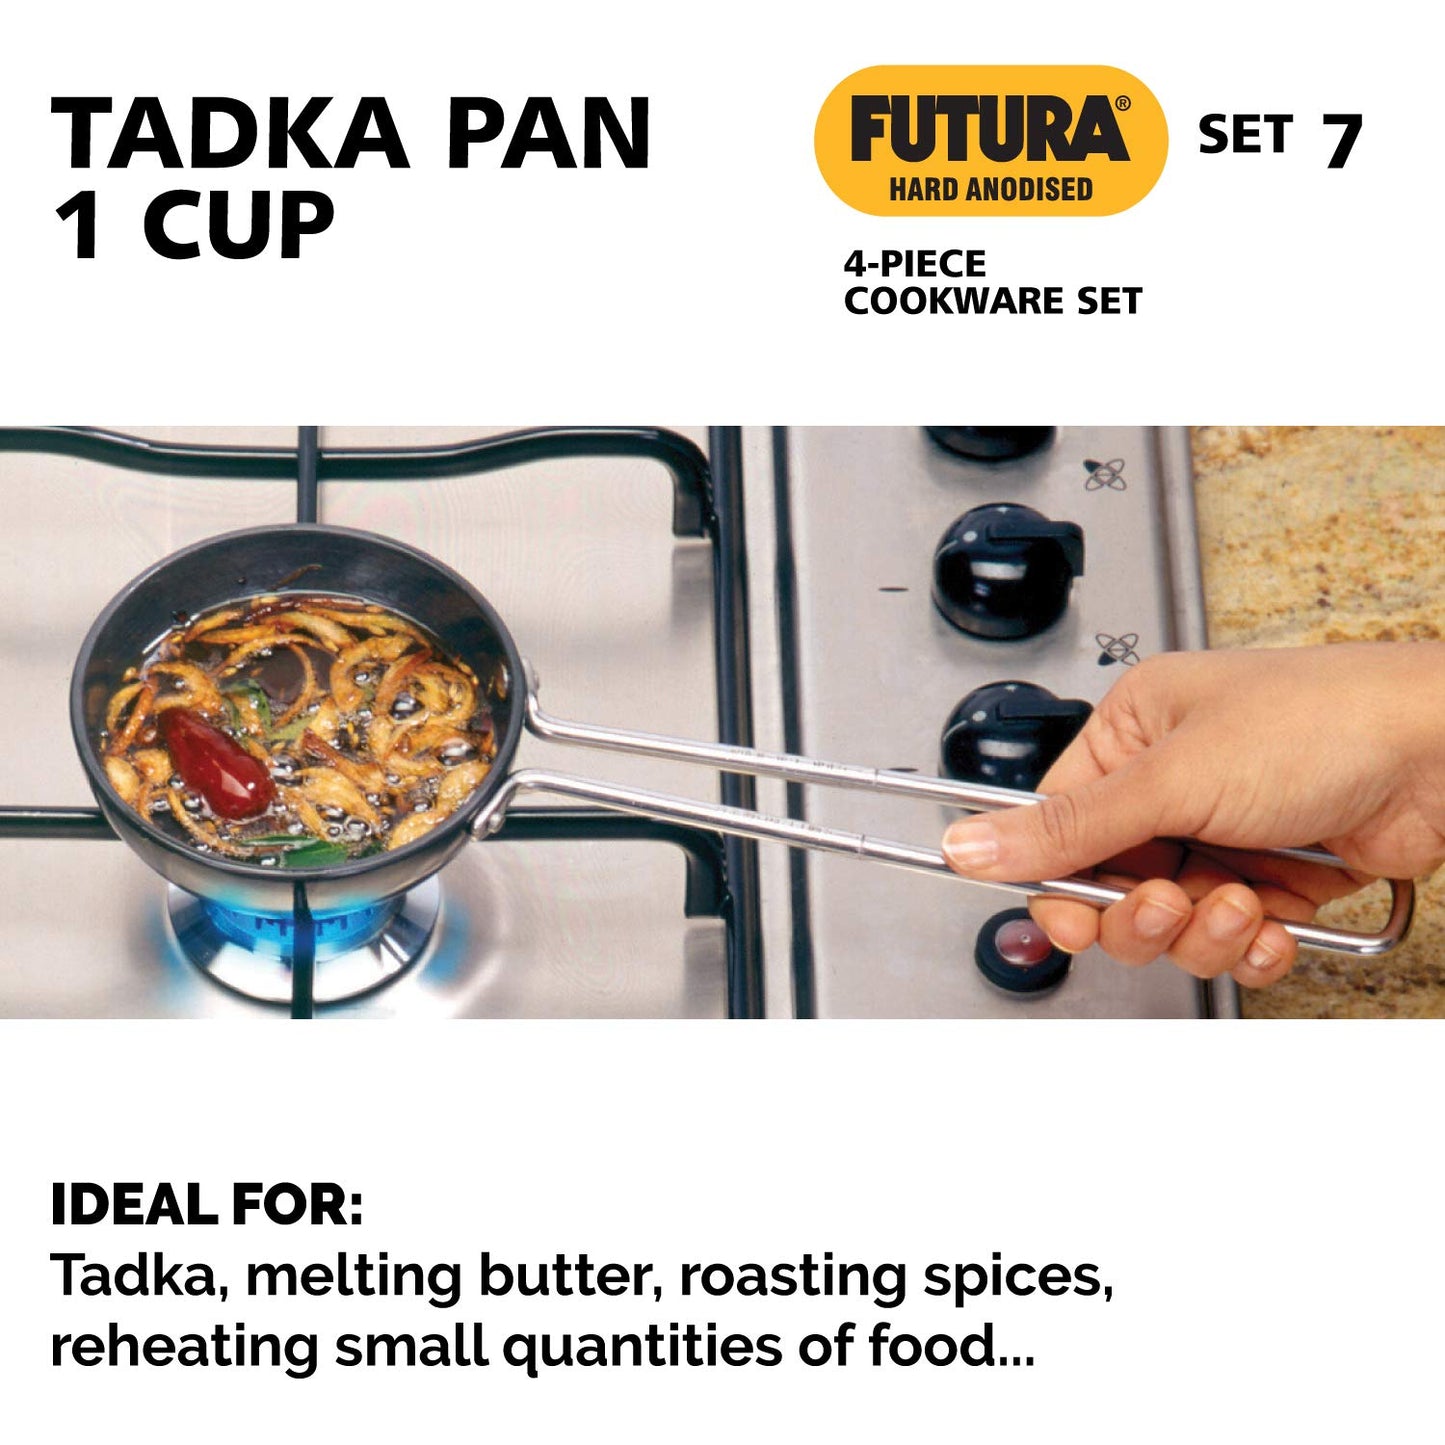 Hawkins Futura 4 Pieces Hard Anodised Cookware Set 7 - 1 Cup Tadka Pan, 18cm Fry Pan, 2.75 Litre Kadhai With SS Lid and 1.5 Litre Suace Pan With SS Lid  - ASET7